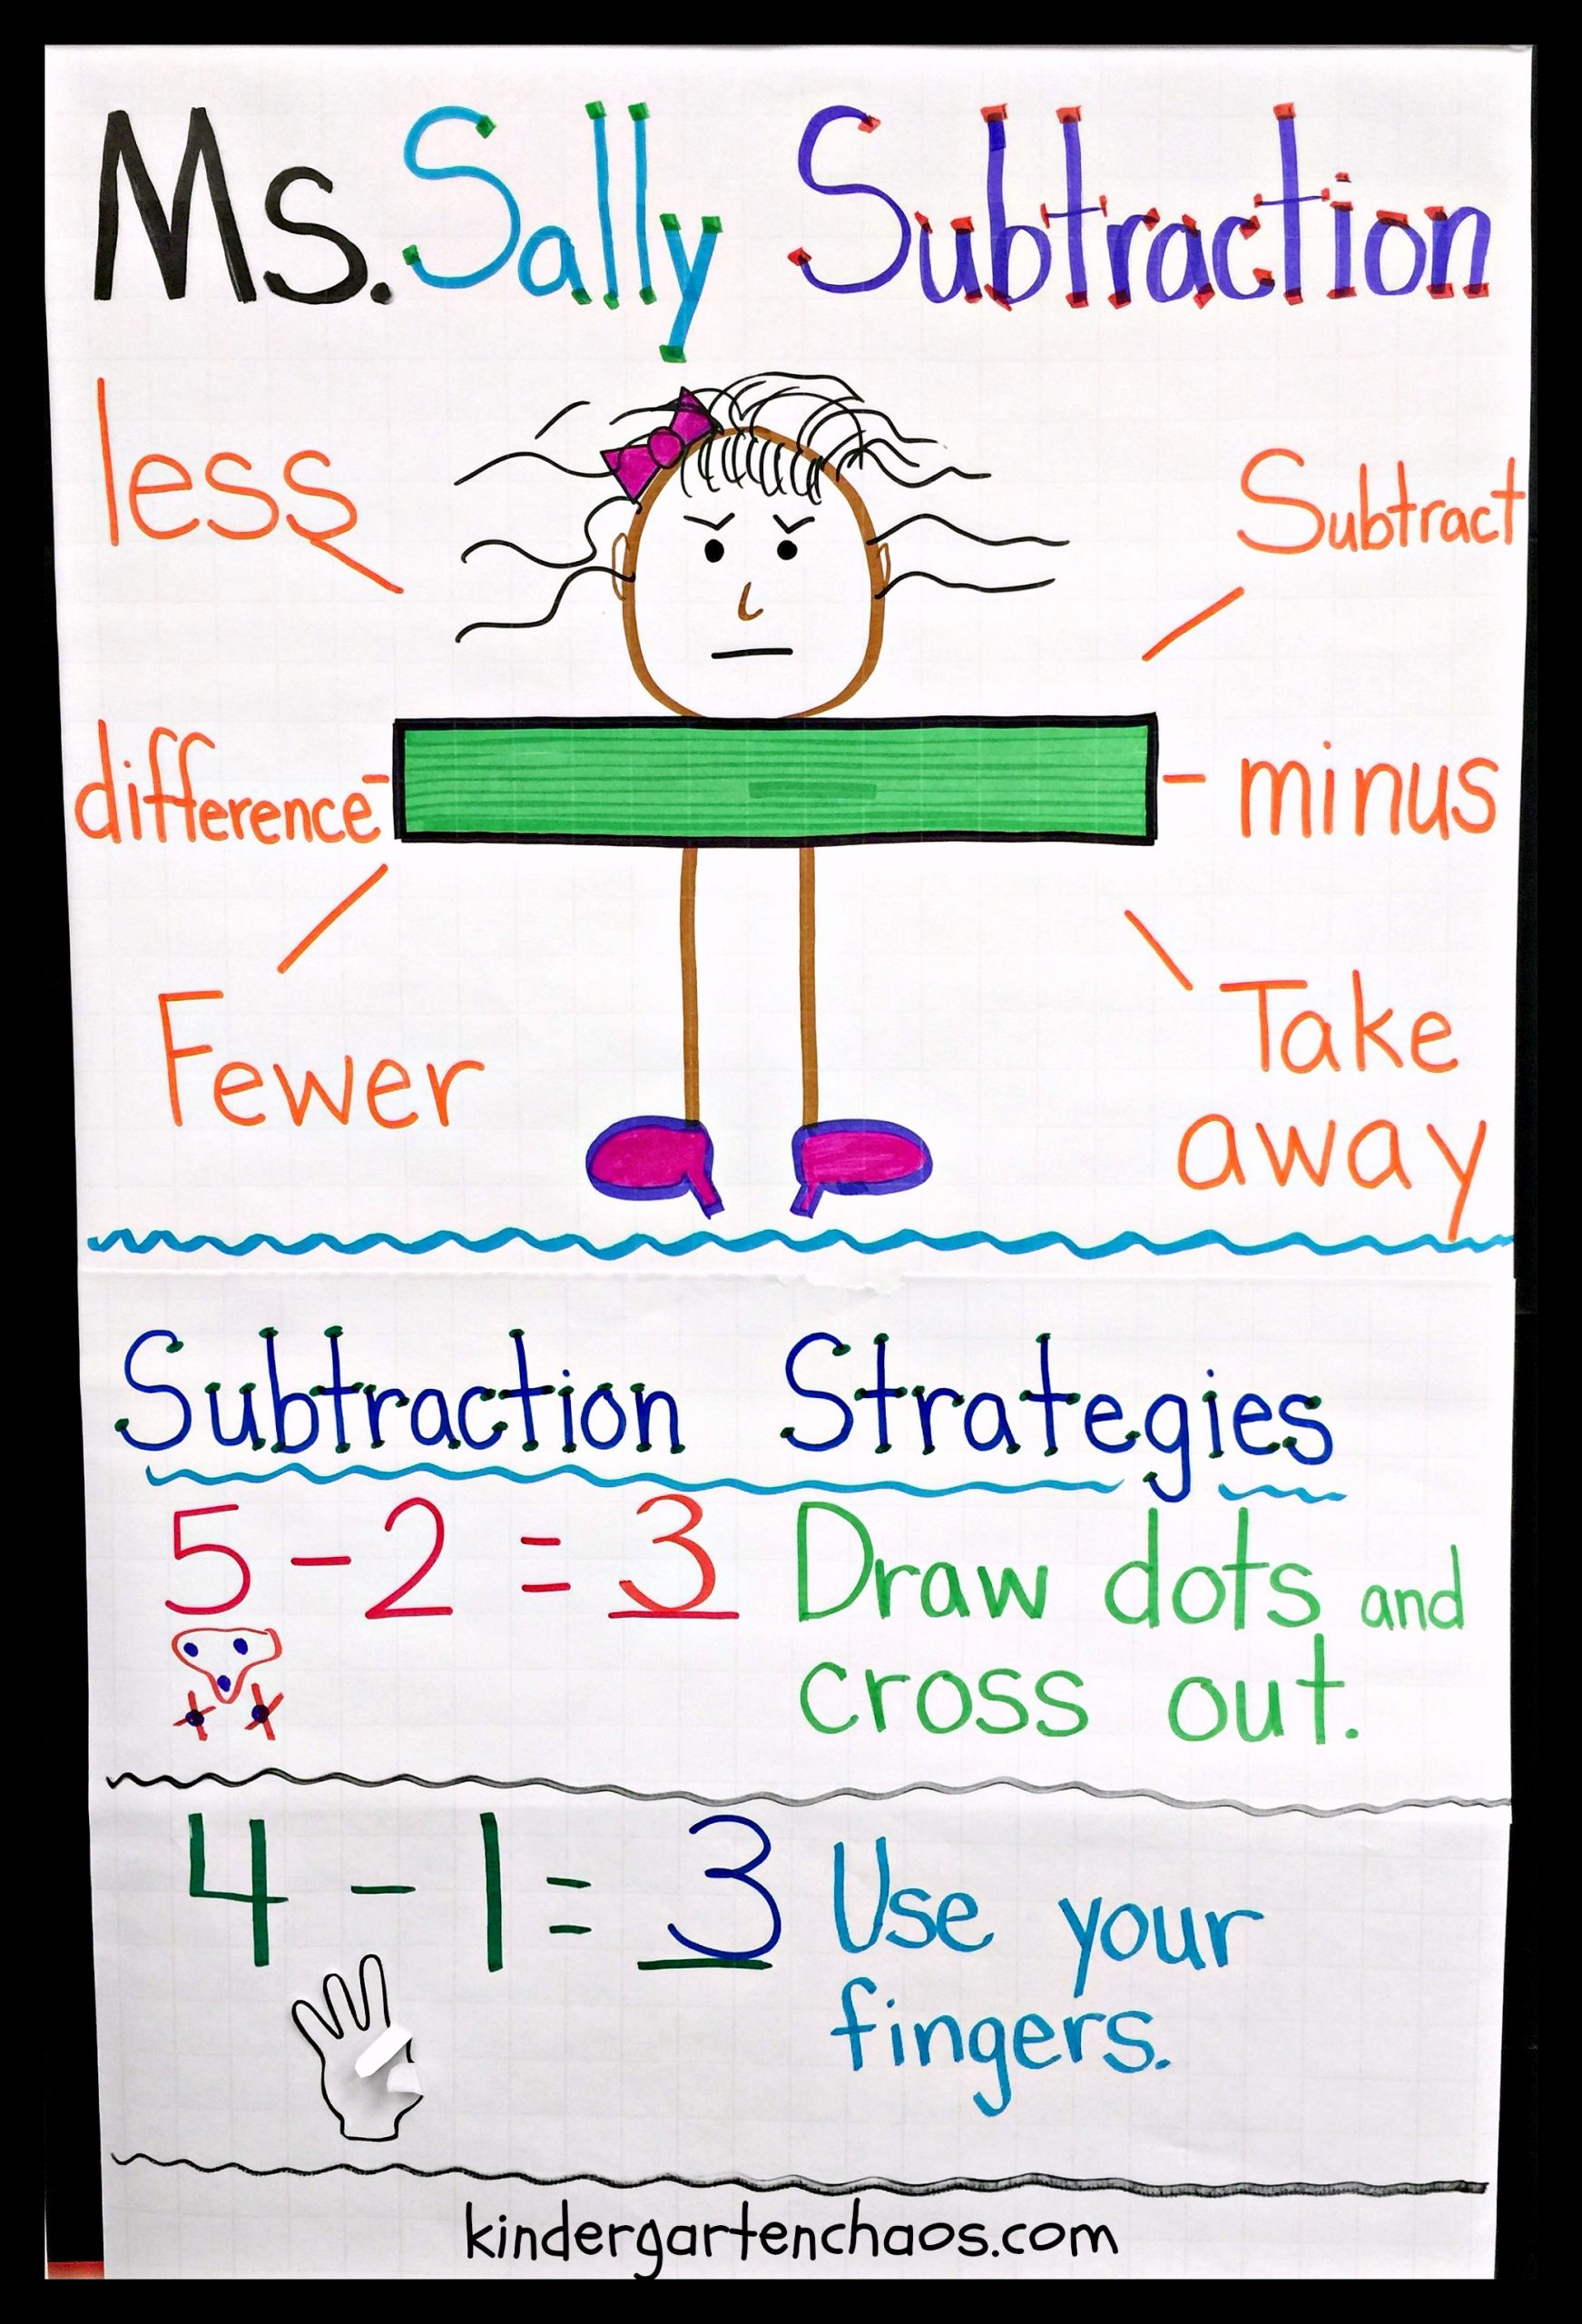 15+ Fun and Free Ideas for Teaching Subtraction